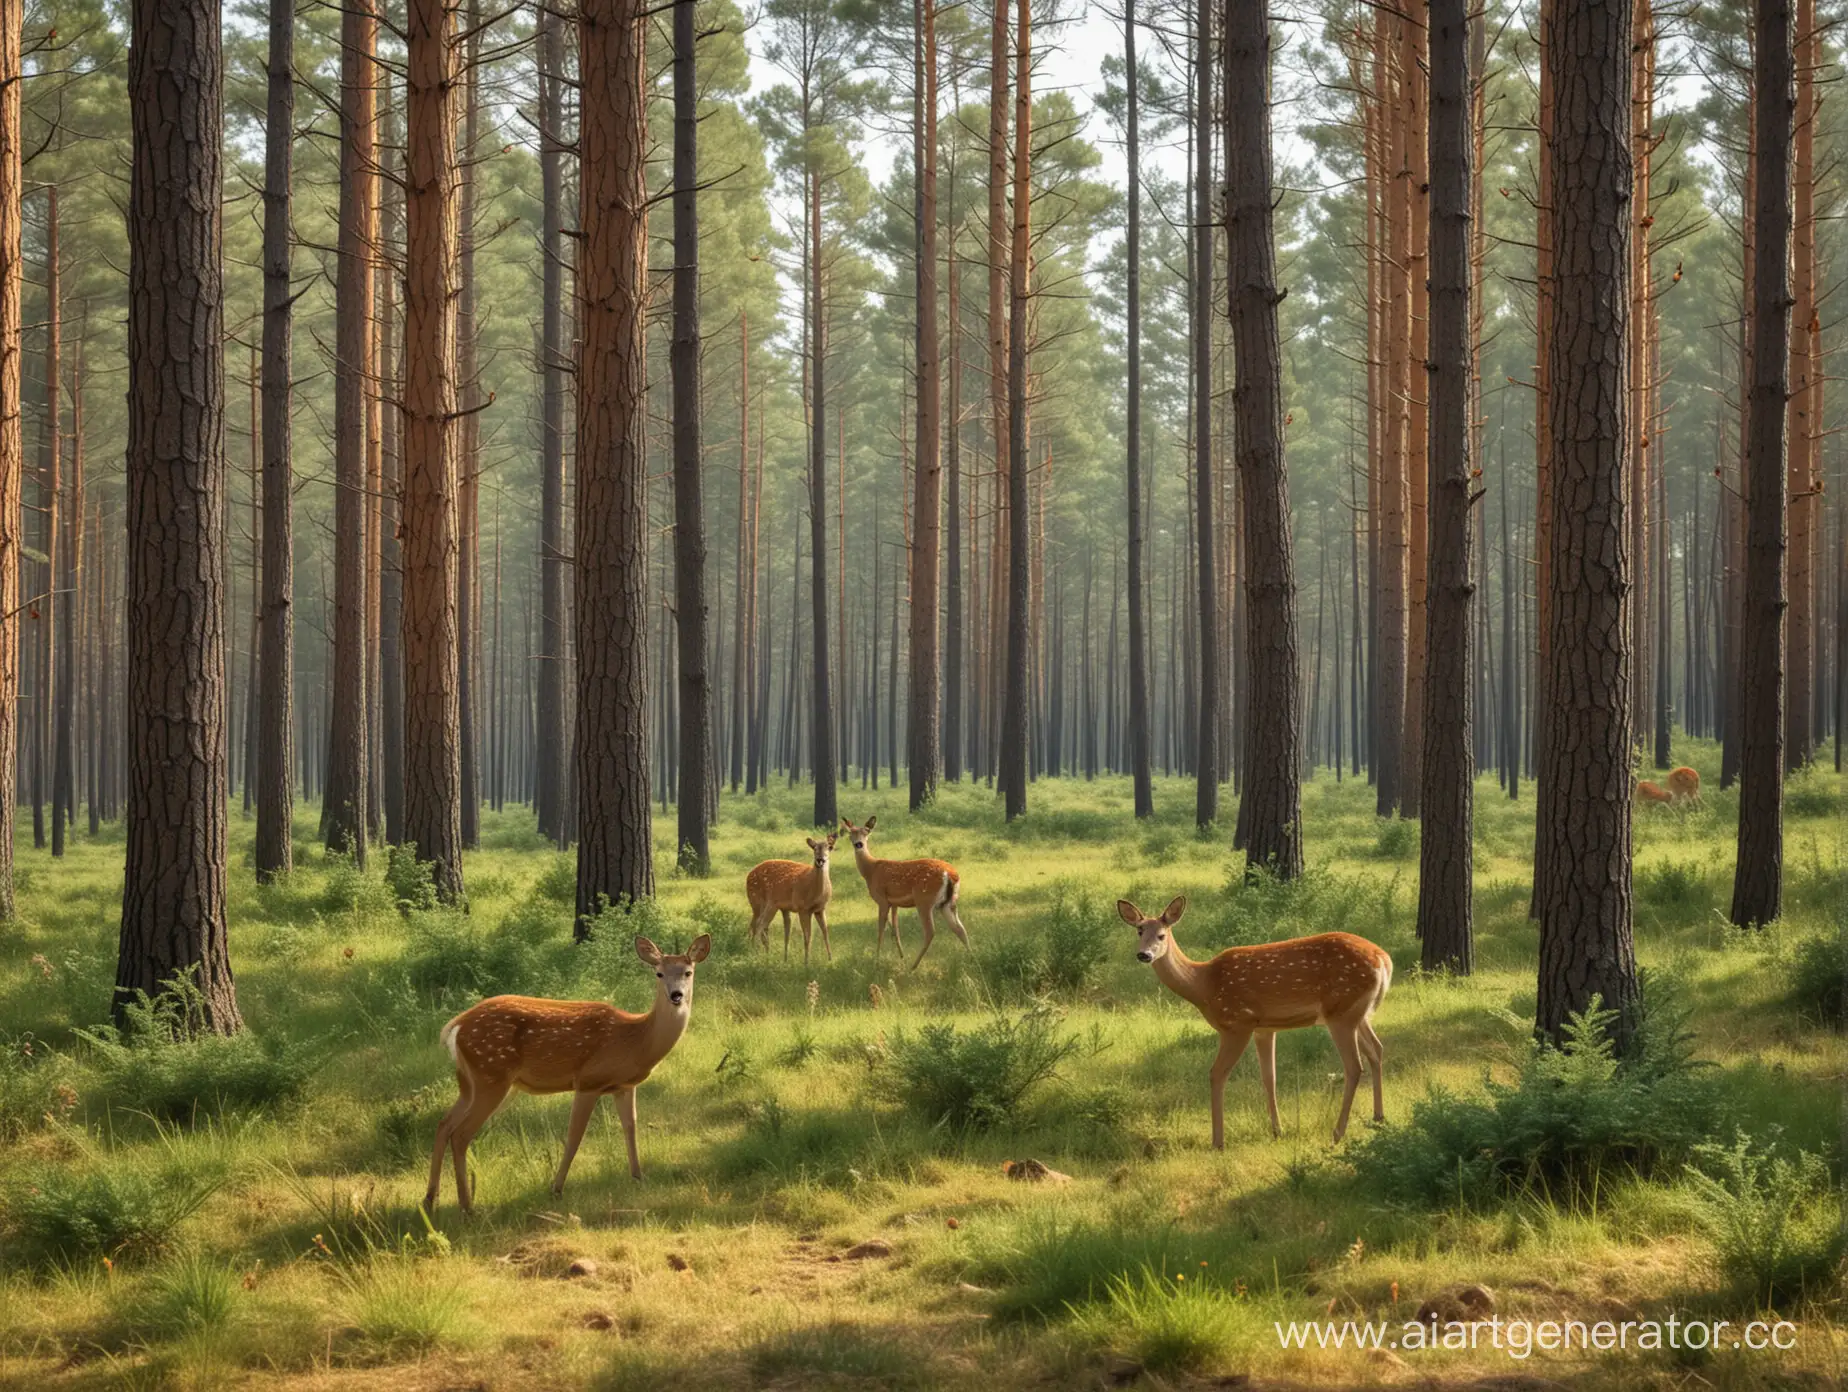 European-Children-Planting-Trees-in-a-Serene-Pine-Forest-with-Wildlife